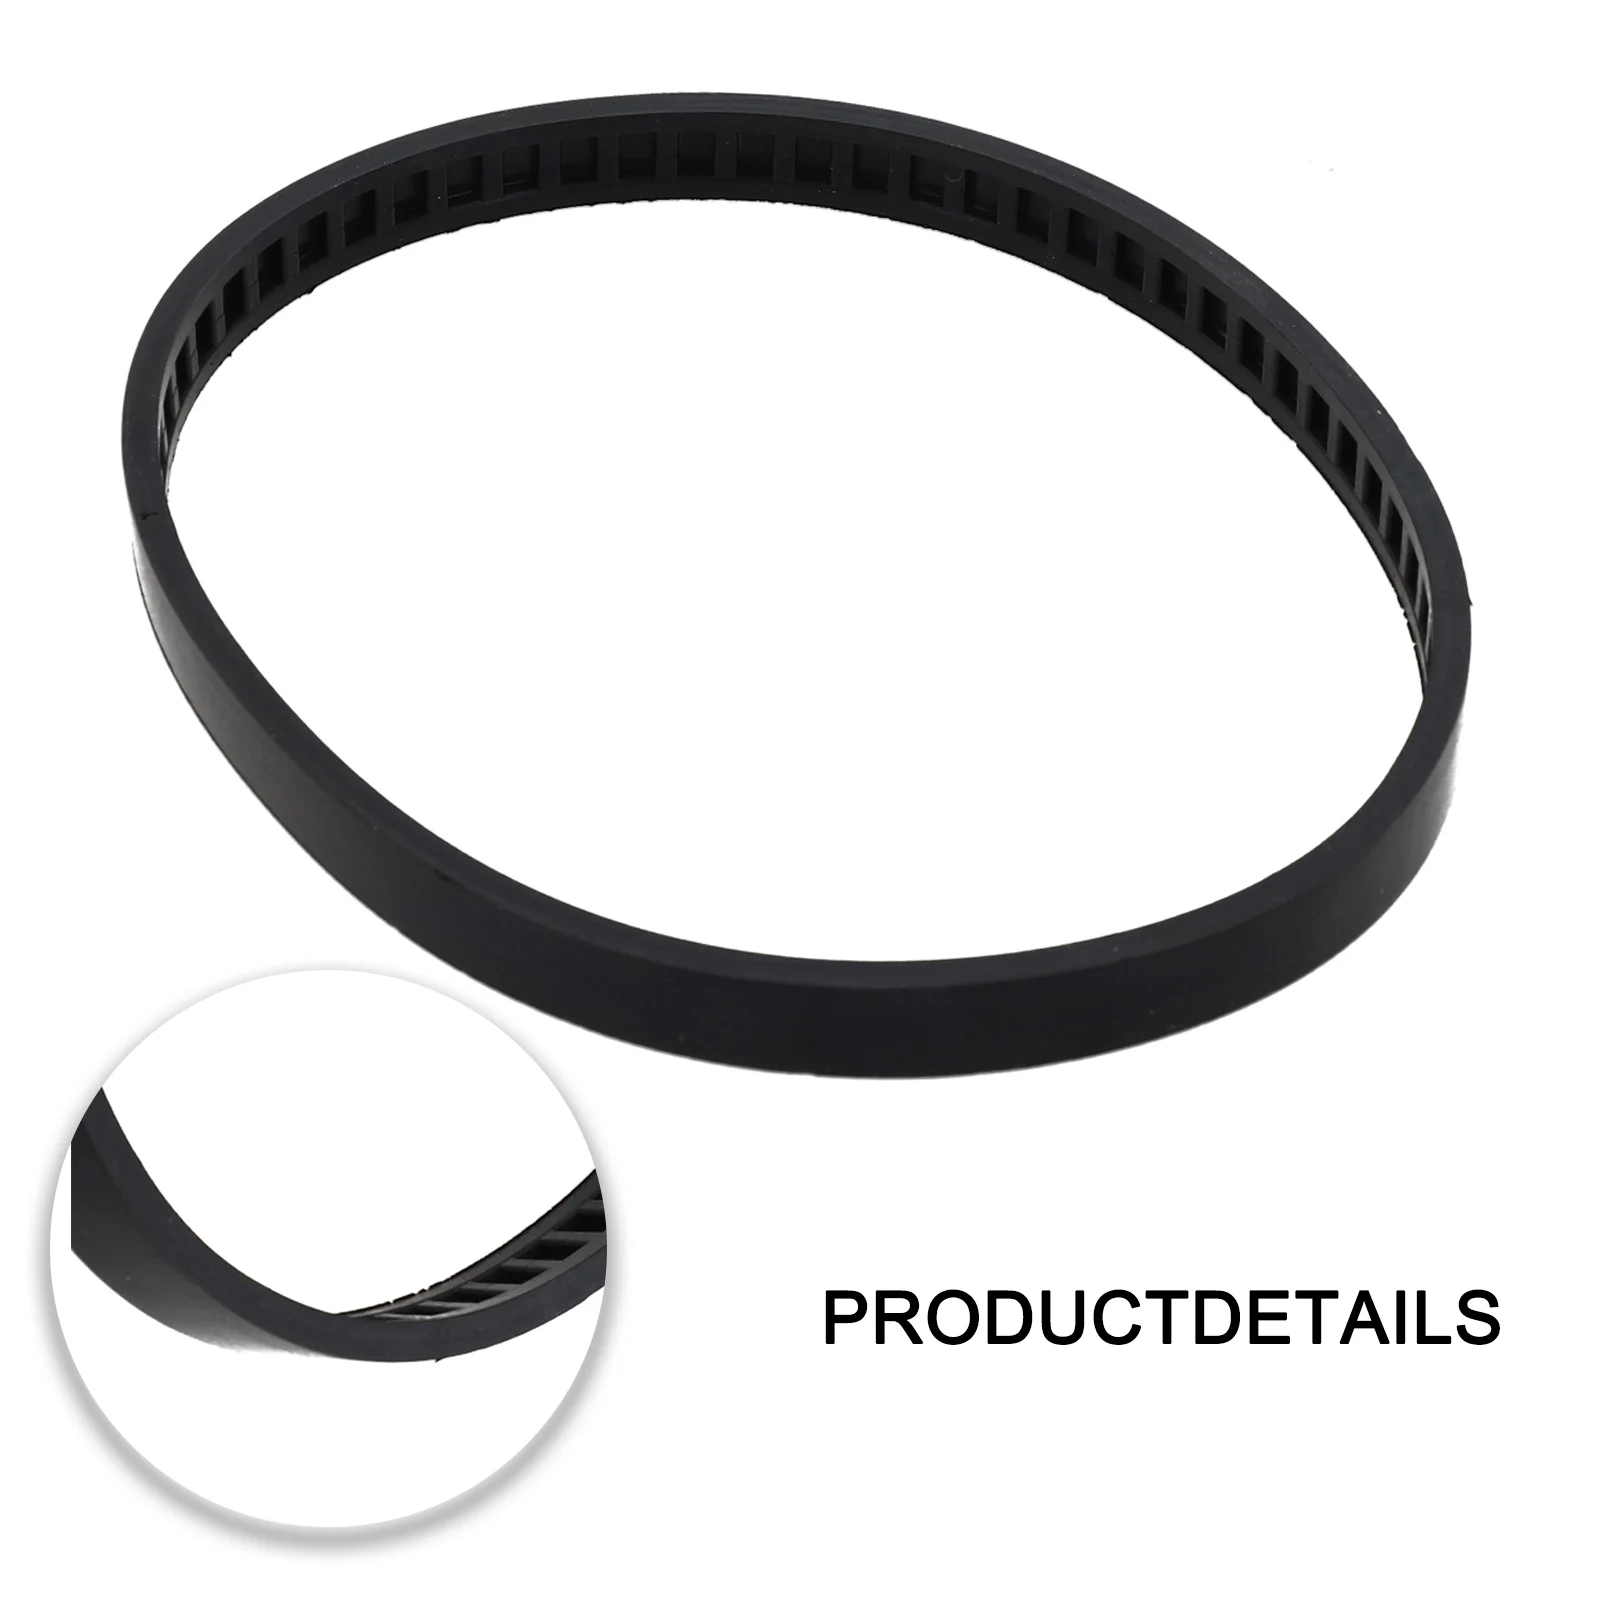 rubber belt s3m 252 255 261 264 267 270 273 276 279 282 285 closed loop transmission belt teeth pitch 3 mm for 3m alloy pulley 45-69-0010 Blade Pulley Tire For Milwaukee Bandsaw Part Deep Cutting Blades Balck Elastic Rubber Belt For Bandsaw Blade